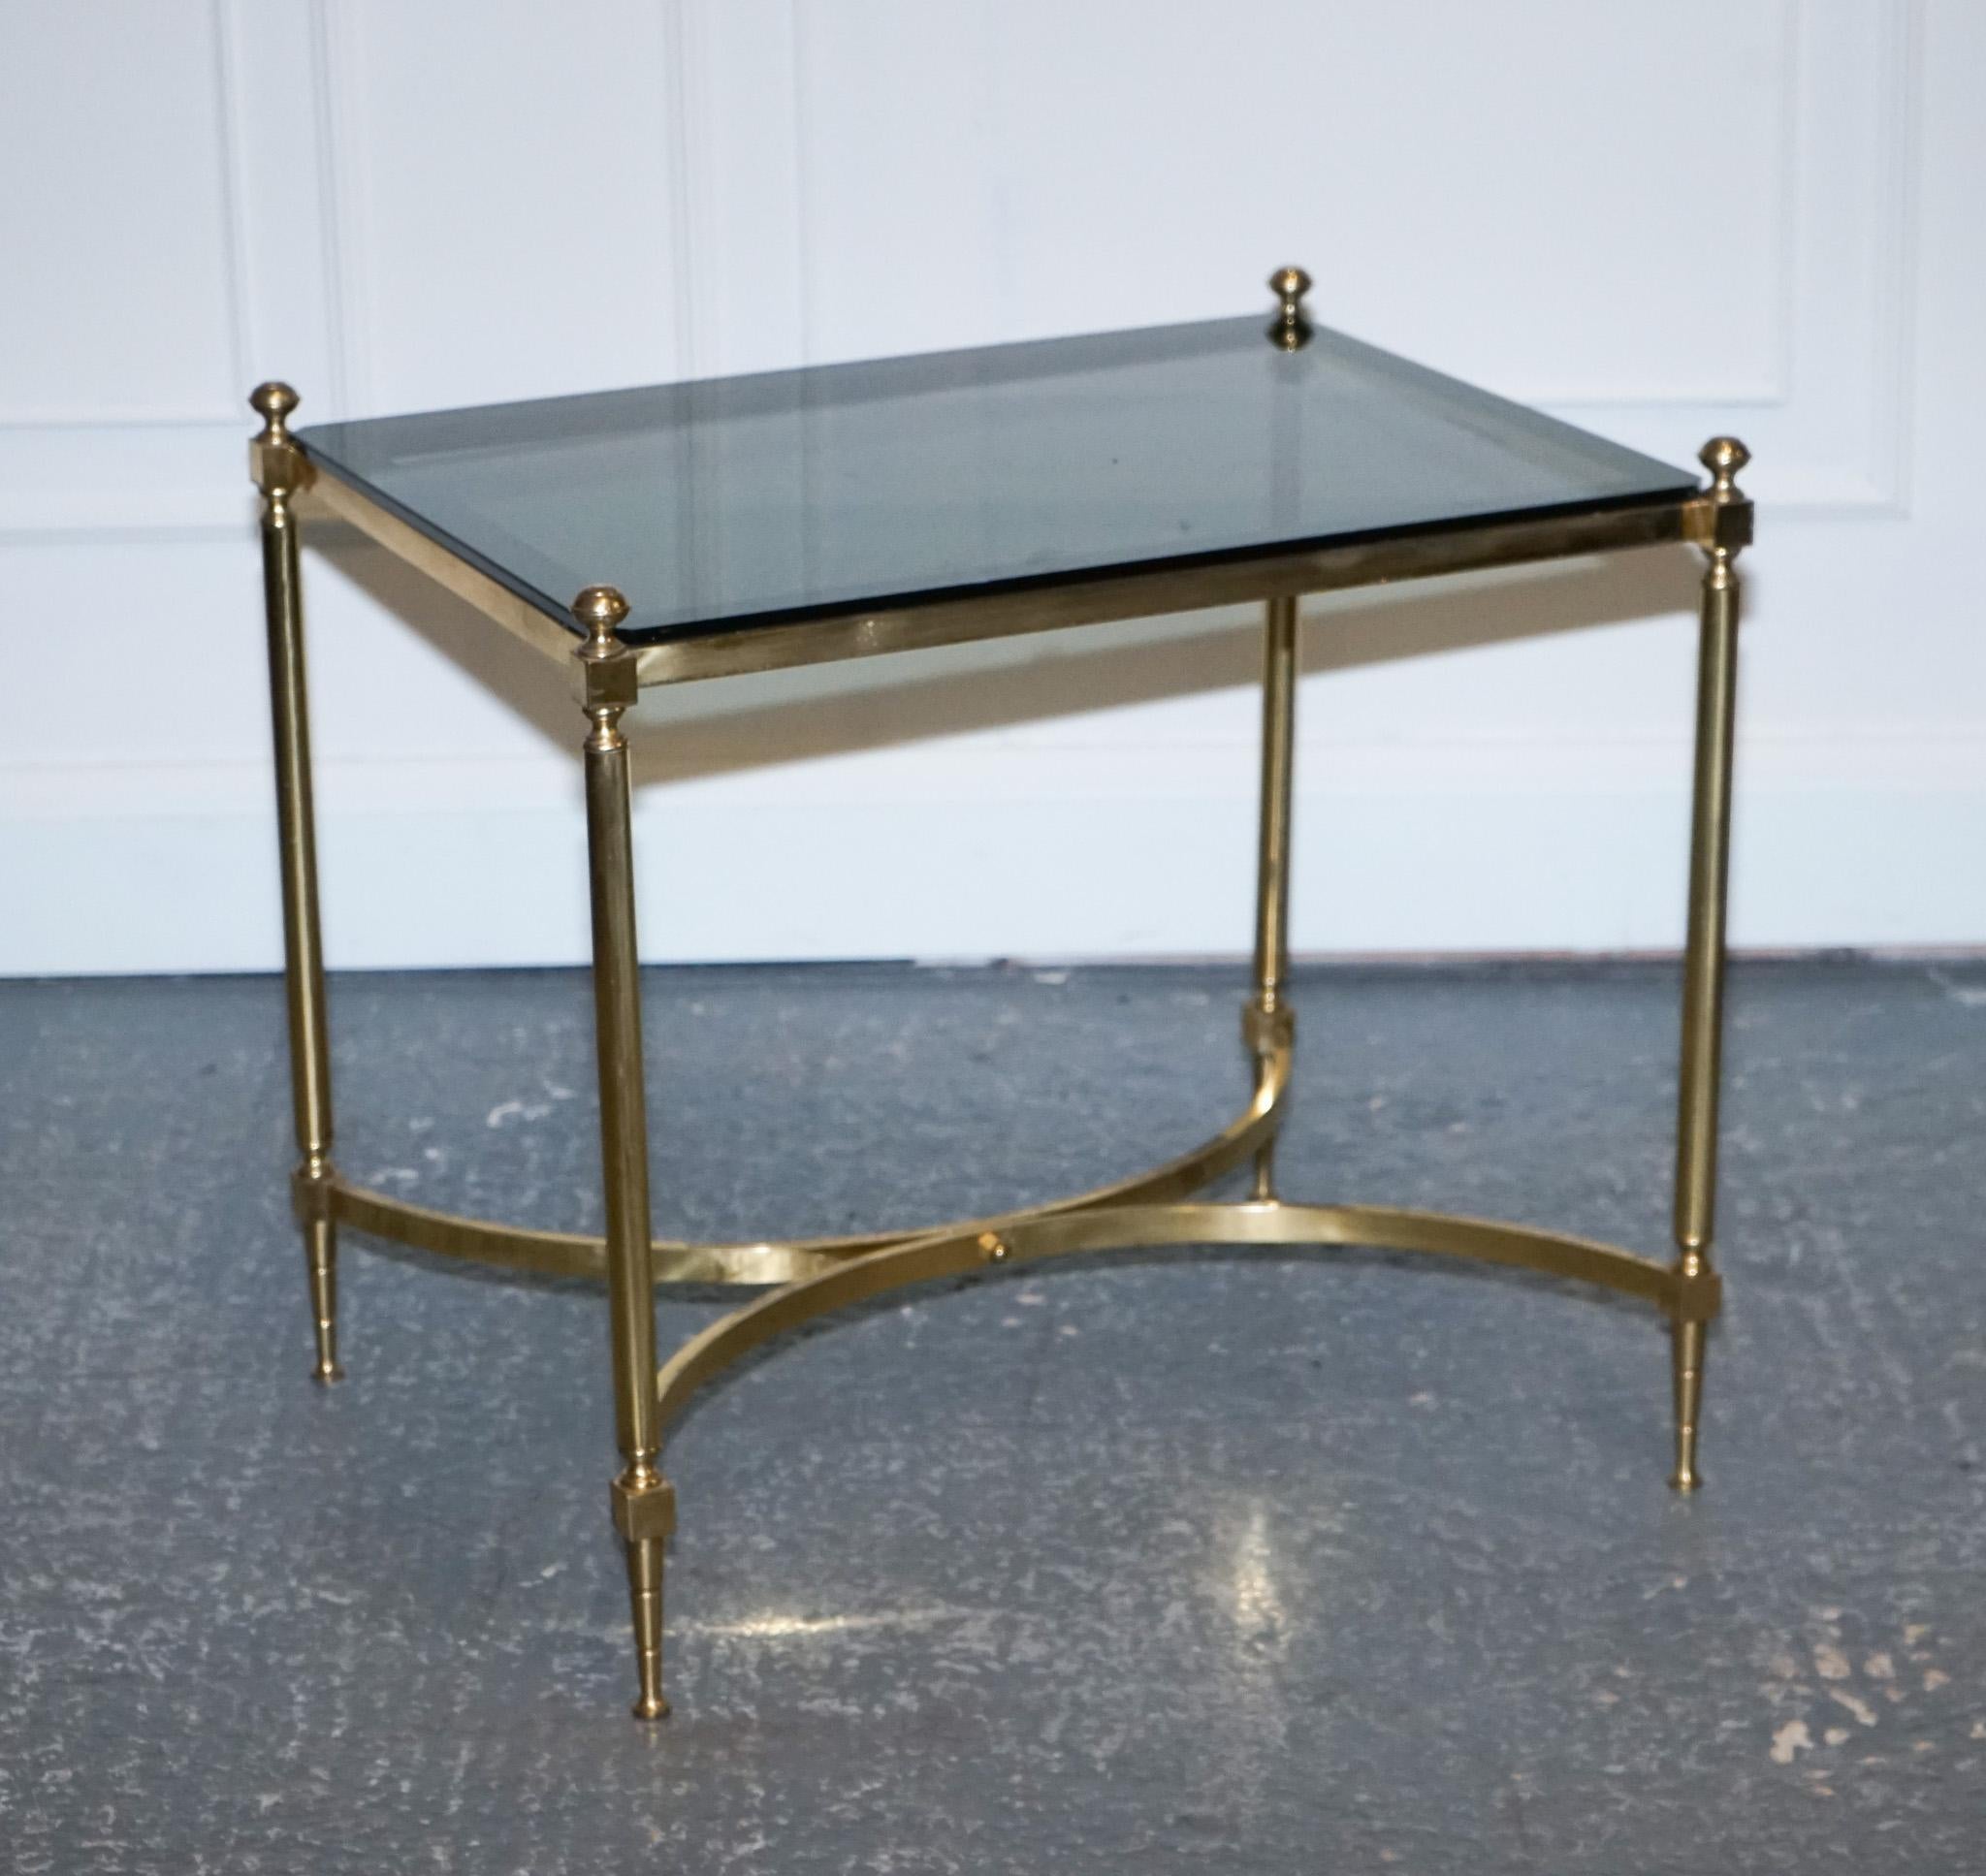 We are delighted to offer for sale this Hollywood Regency Brass & Smoked Glass Coffee Table.

A French Hollywood Regency 1960s brass and smoked glass coffee table is a truly stunning and luxurious piece of furniture. This coffee table is crafted